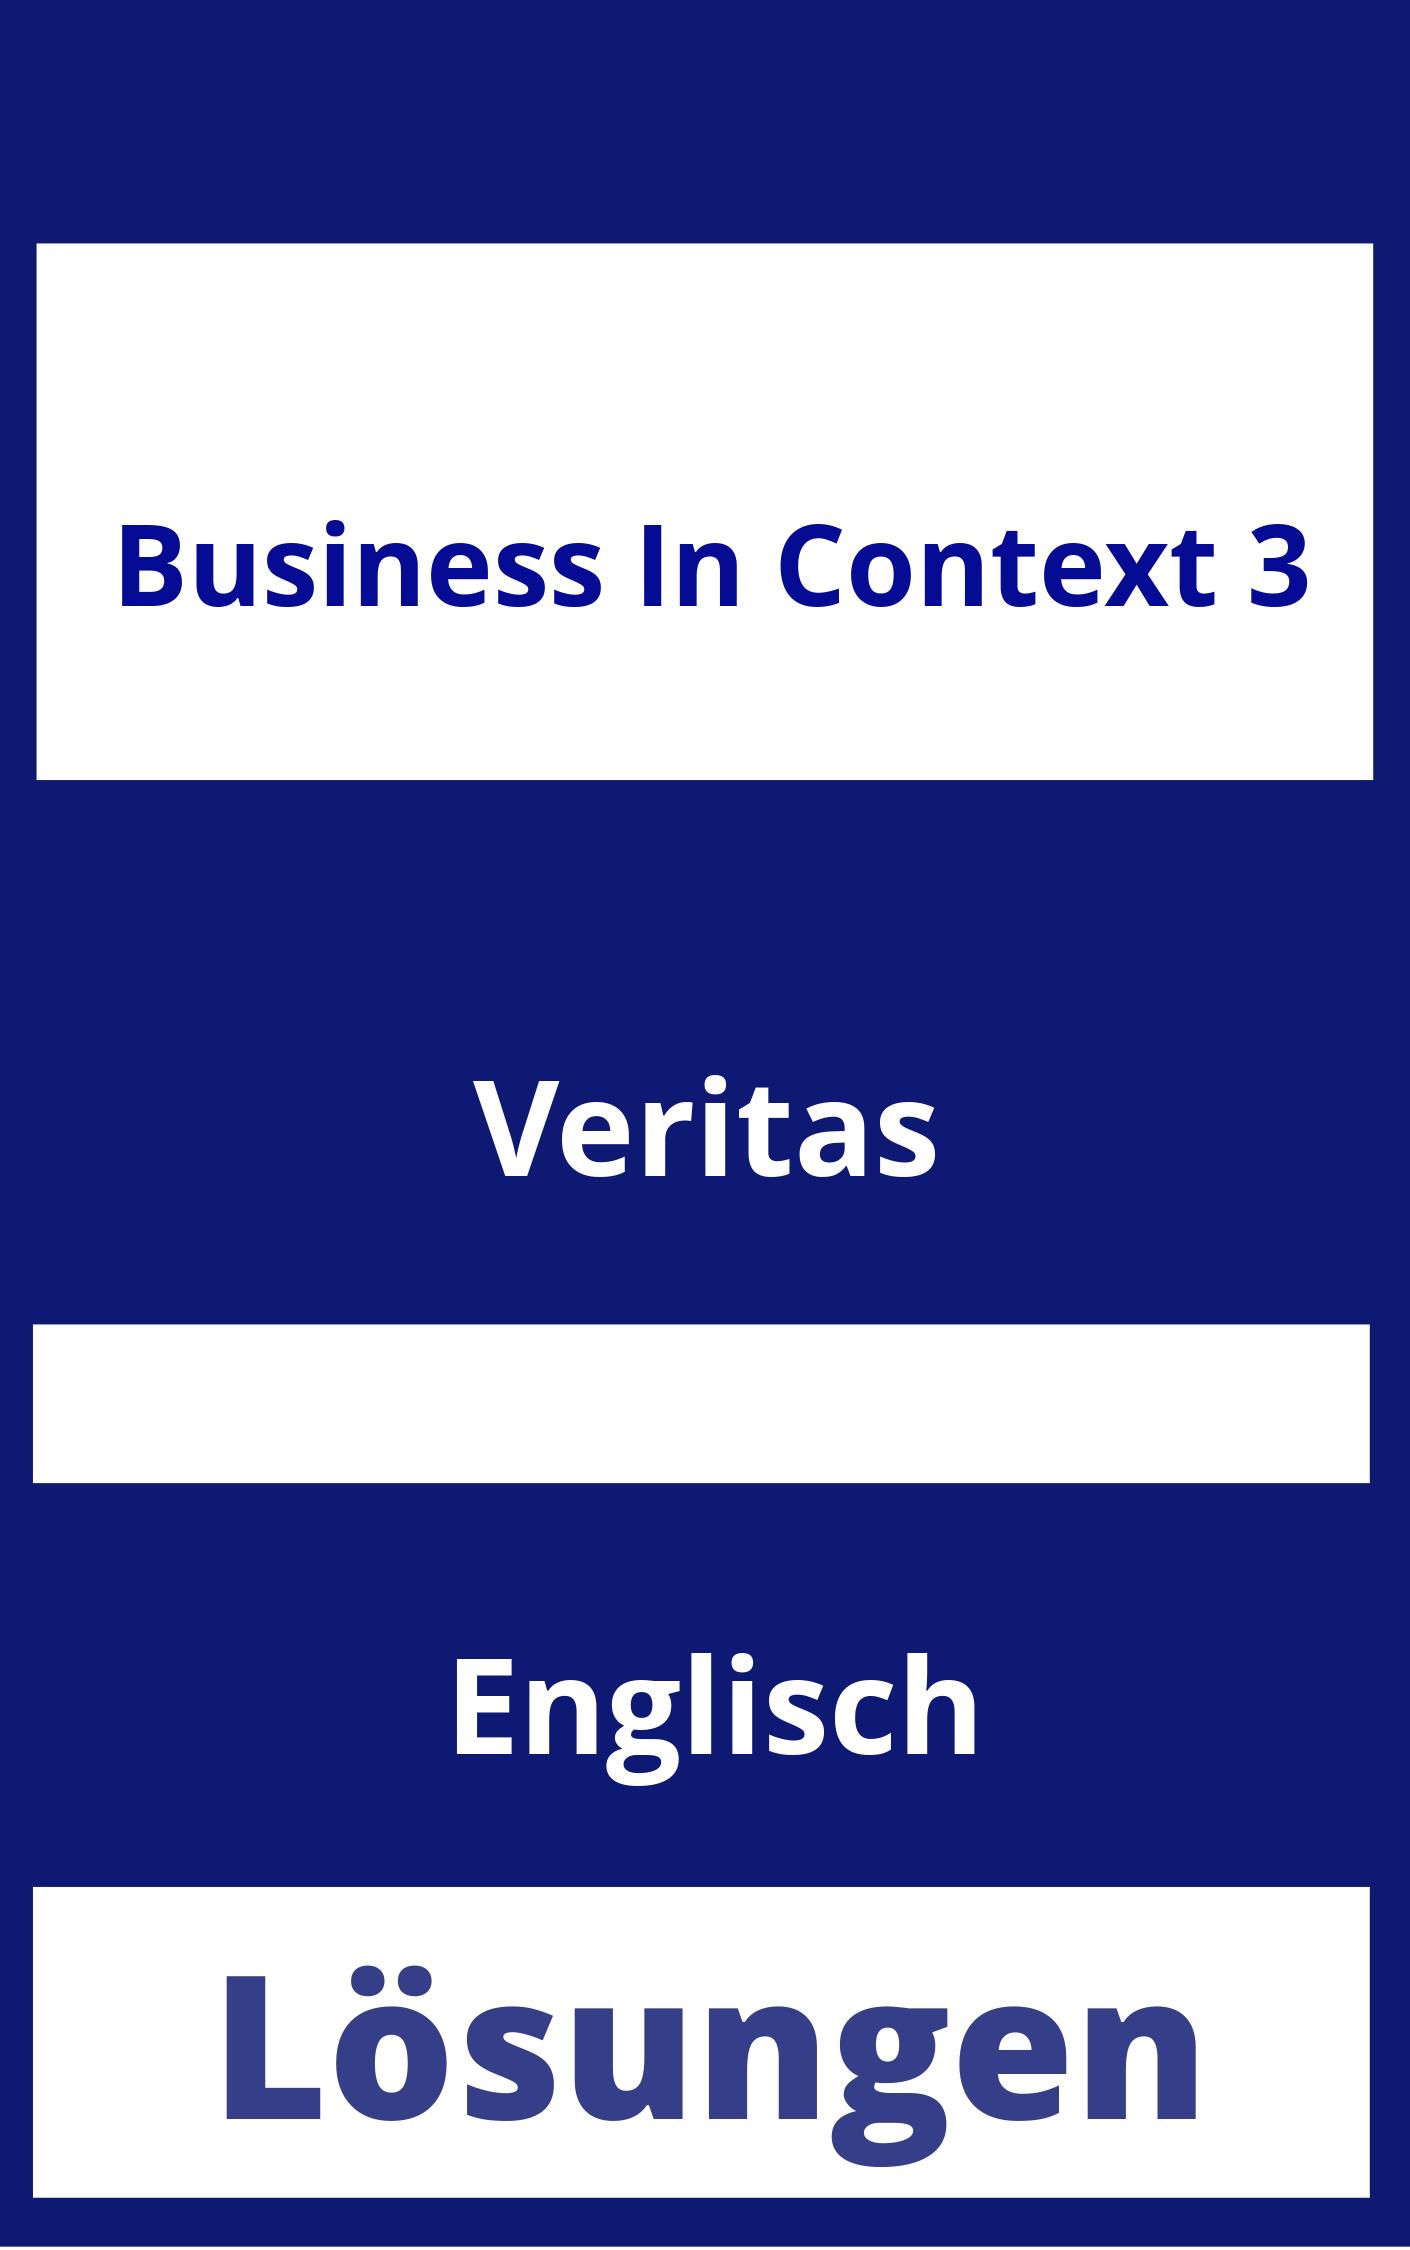 Business in context 3